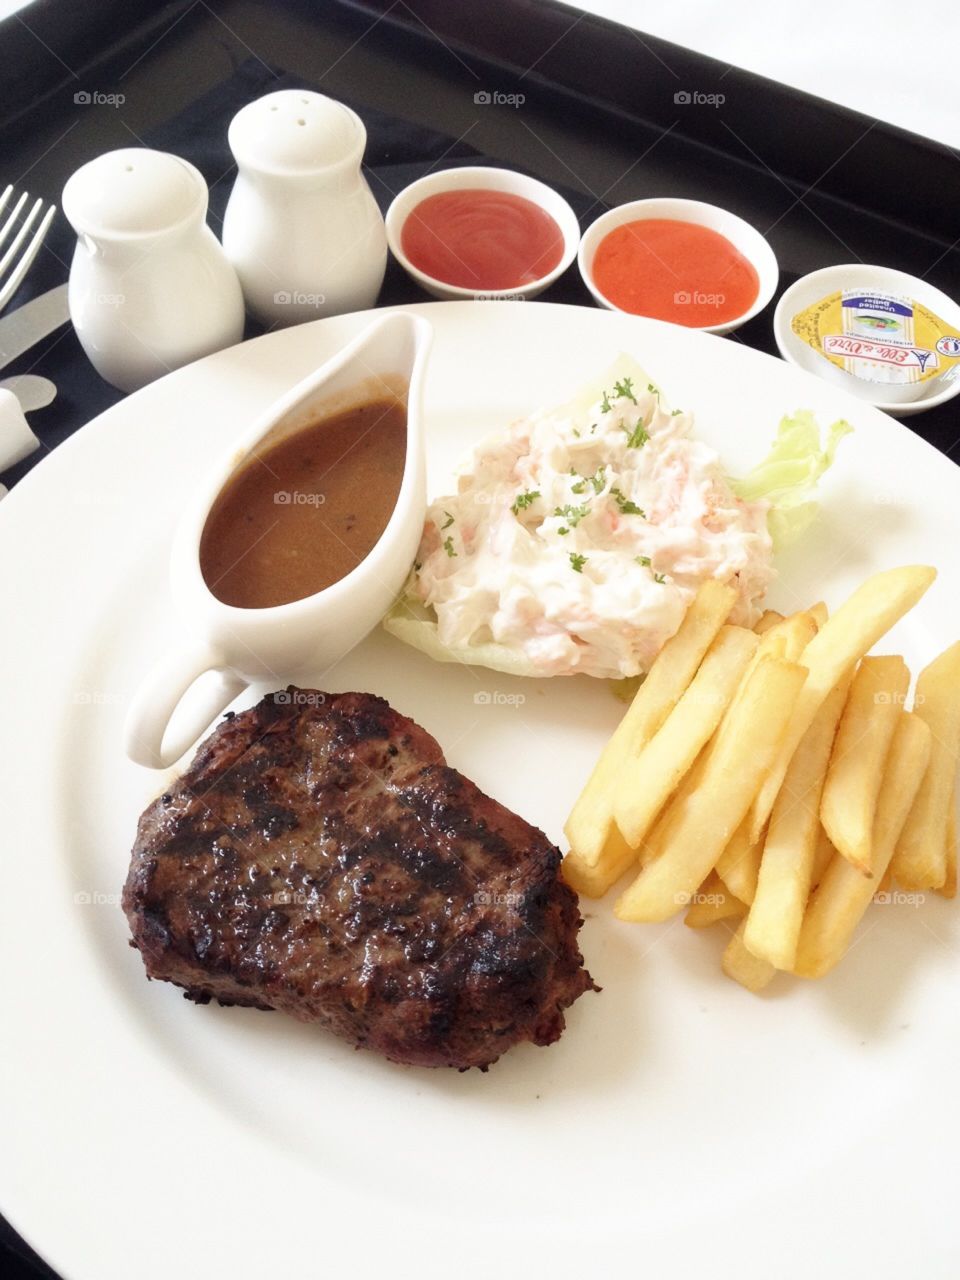 Favourite Meal. Tenderloin steak with fries and coleslaw.